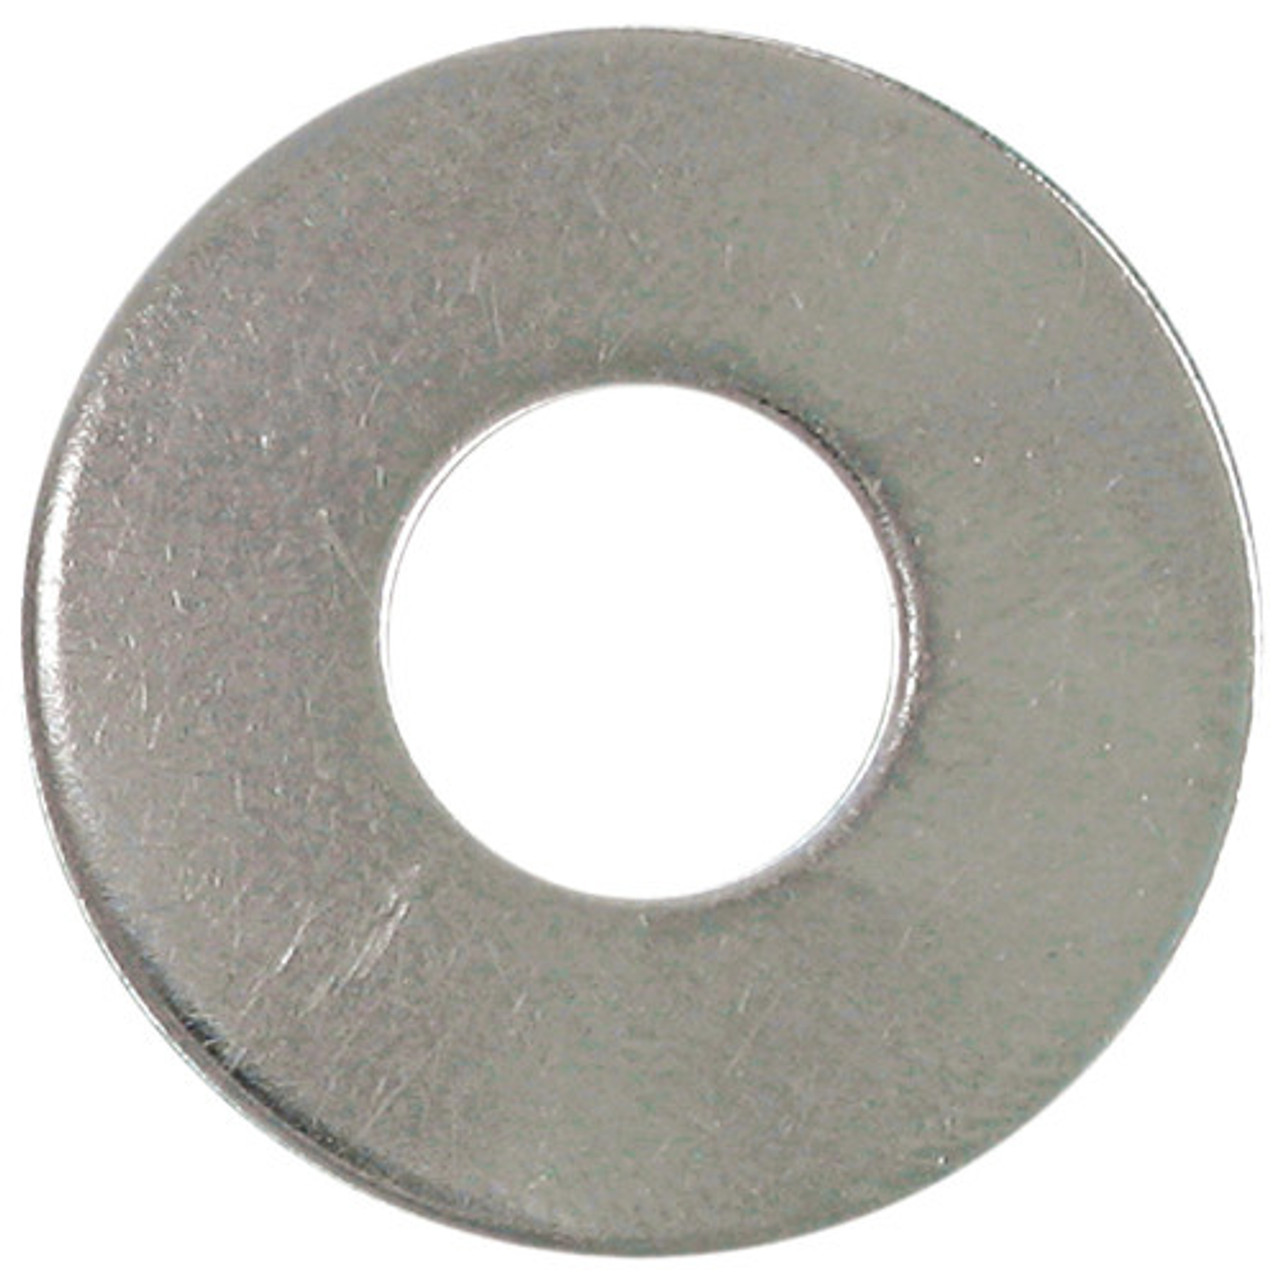 2" Zinc Plated Spacer Washer 25 Pc.   162-944